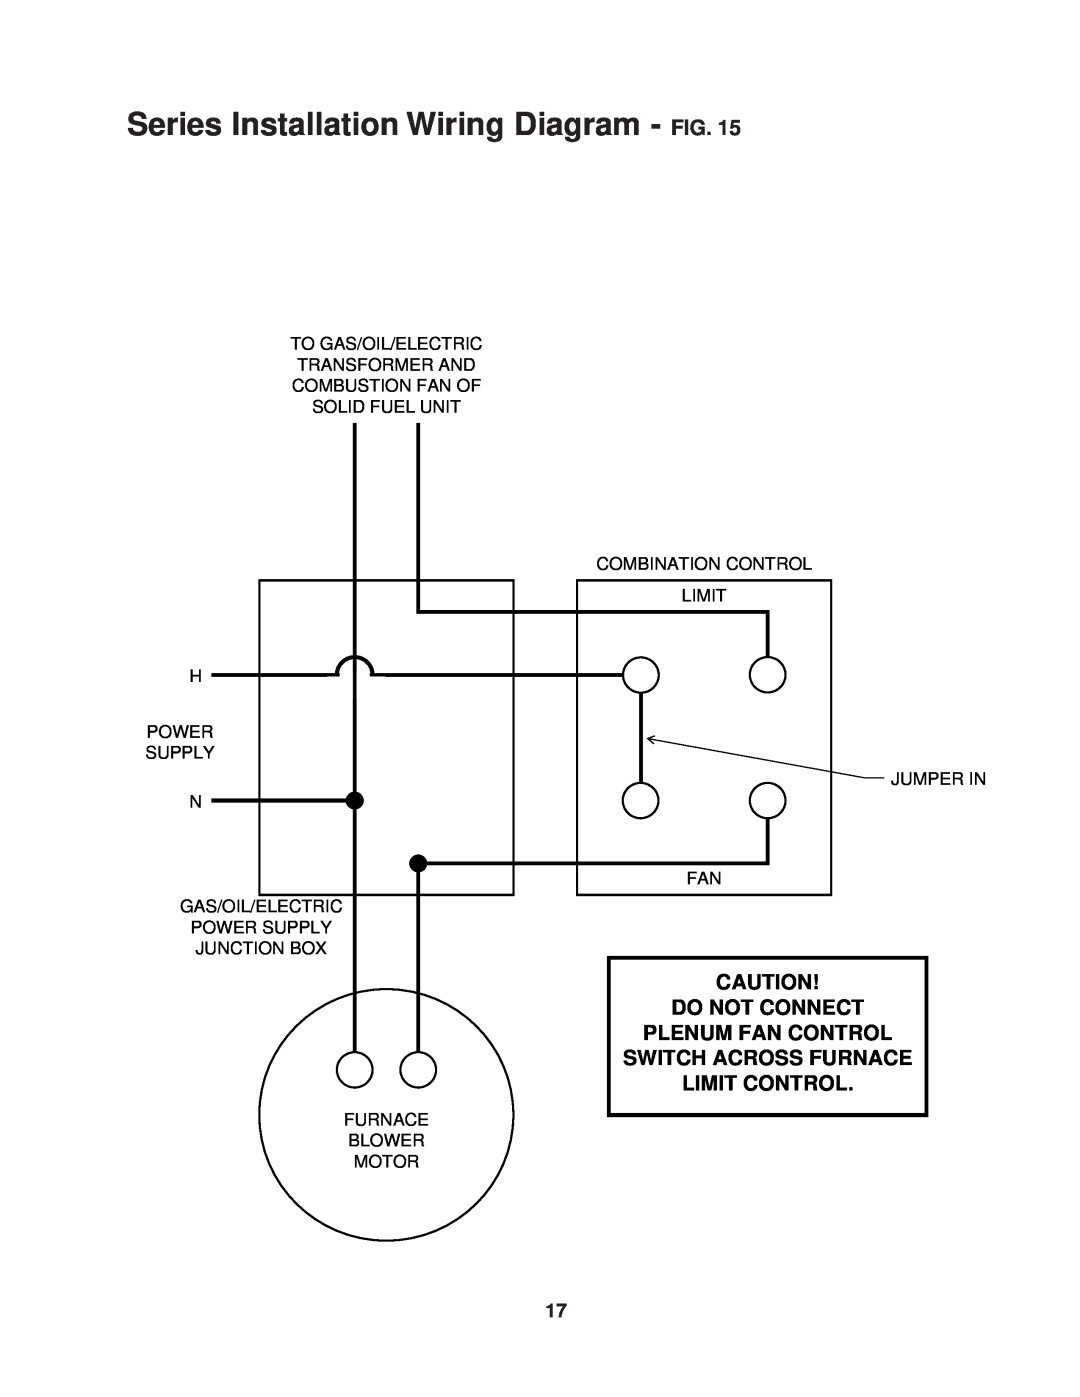 United States Stove 1537Q Series Installation Wiring Diagram - FIG, Do Not Connect Plenum Fan Control, Junction Box 